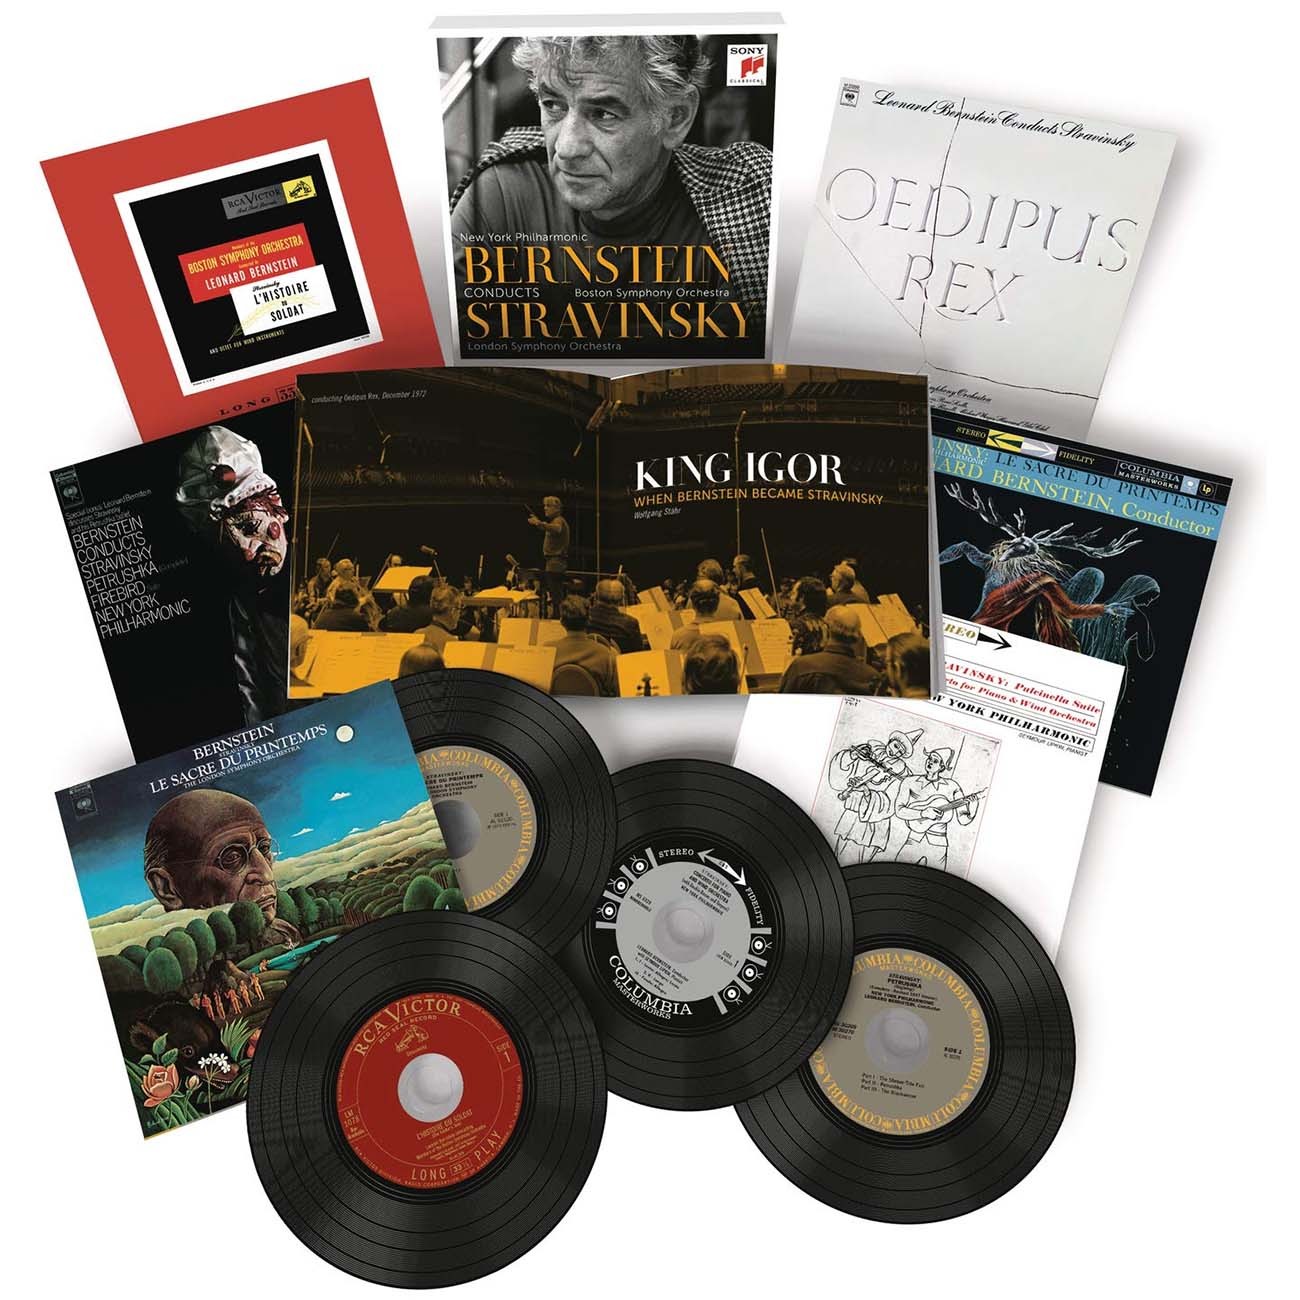 Vinyl Records  The Met Store at